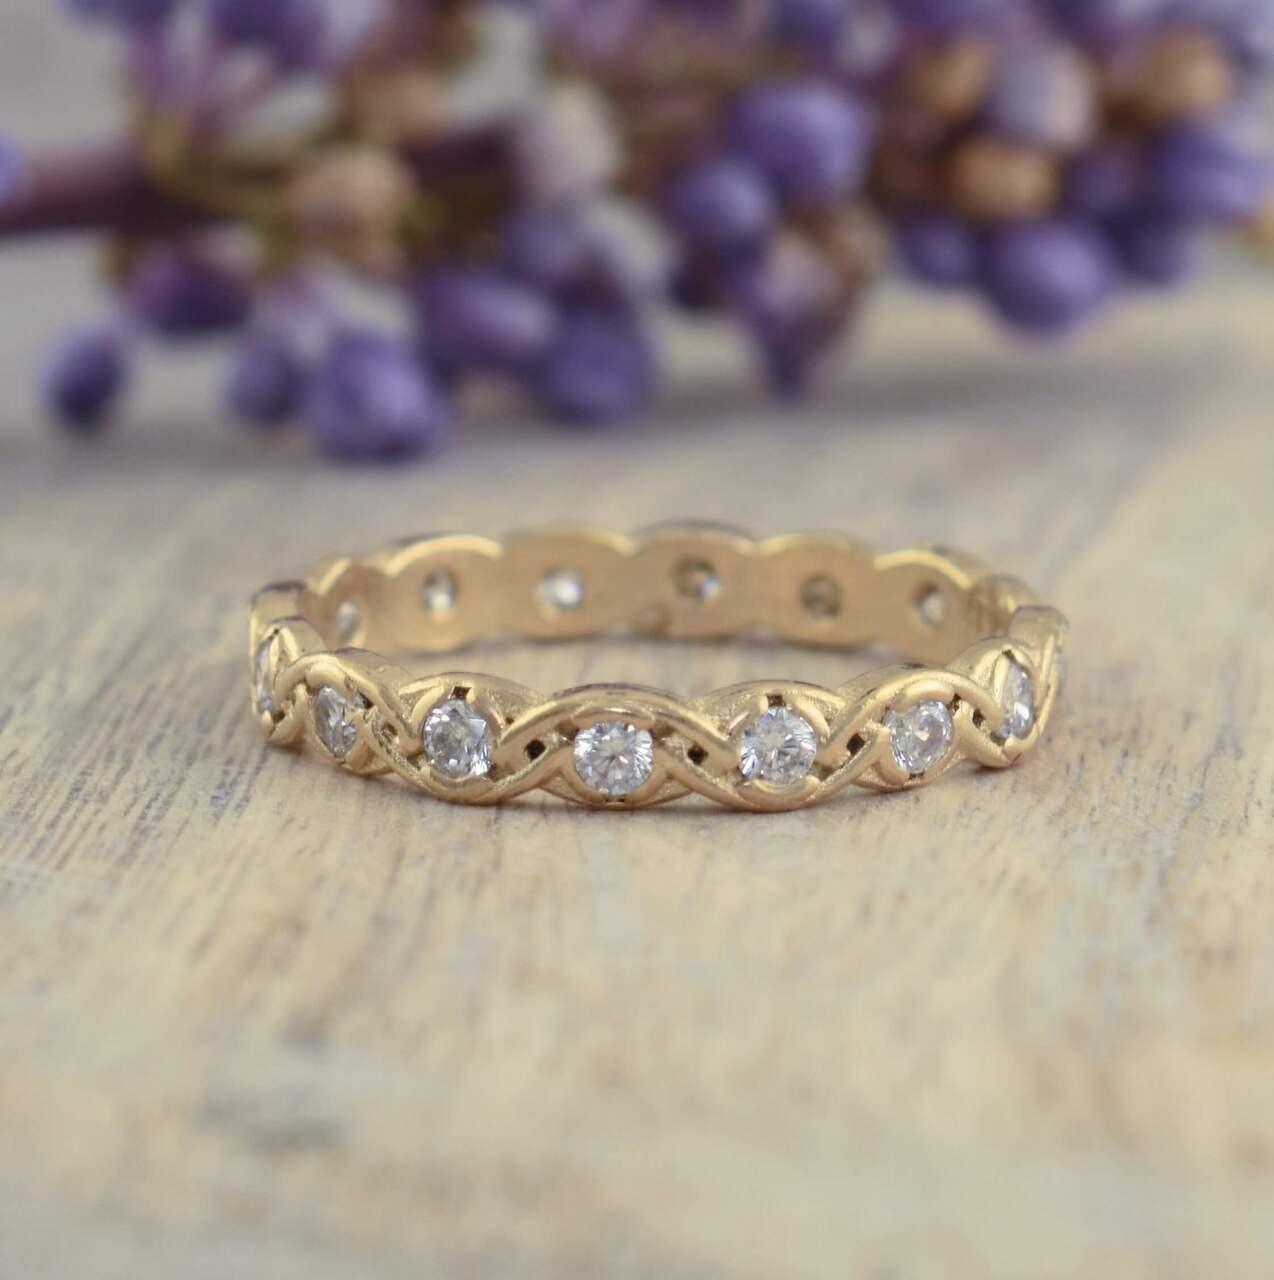 Riley Eternity Ring - In Gold made with handcrafted vermeil